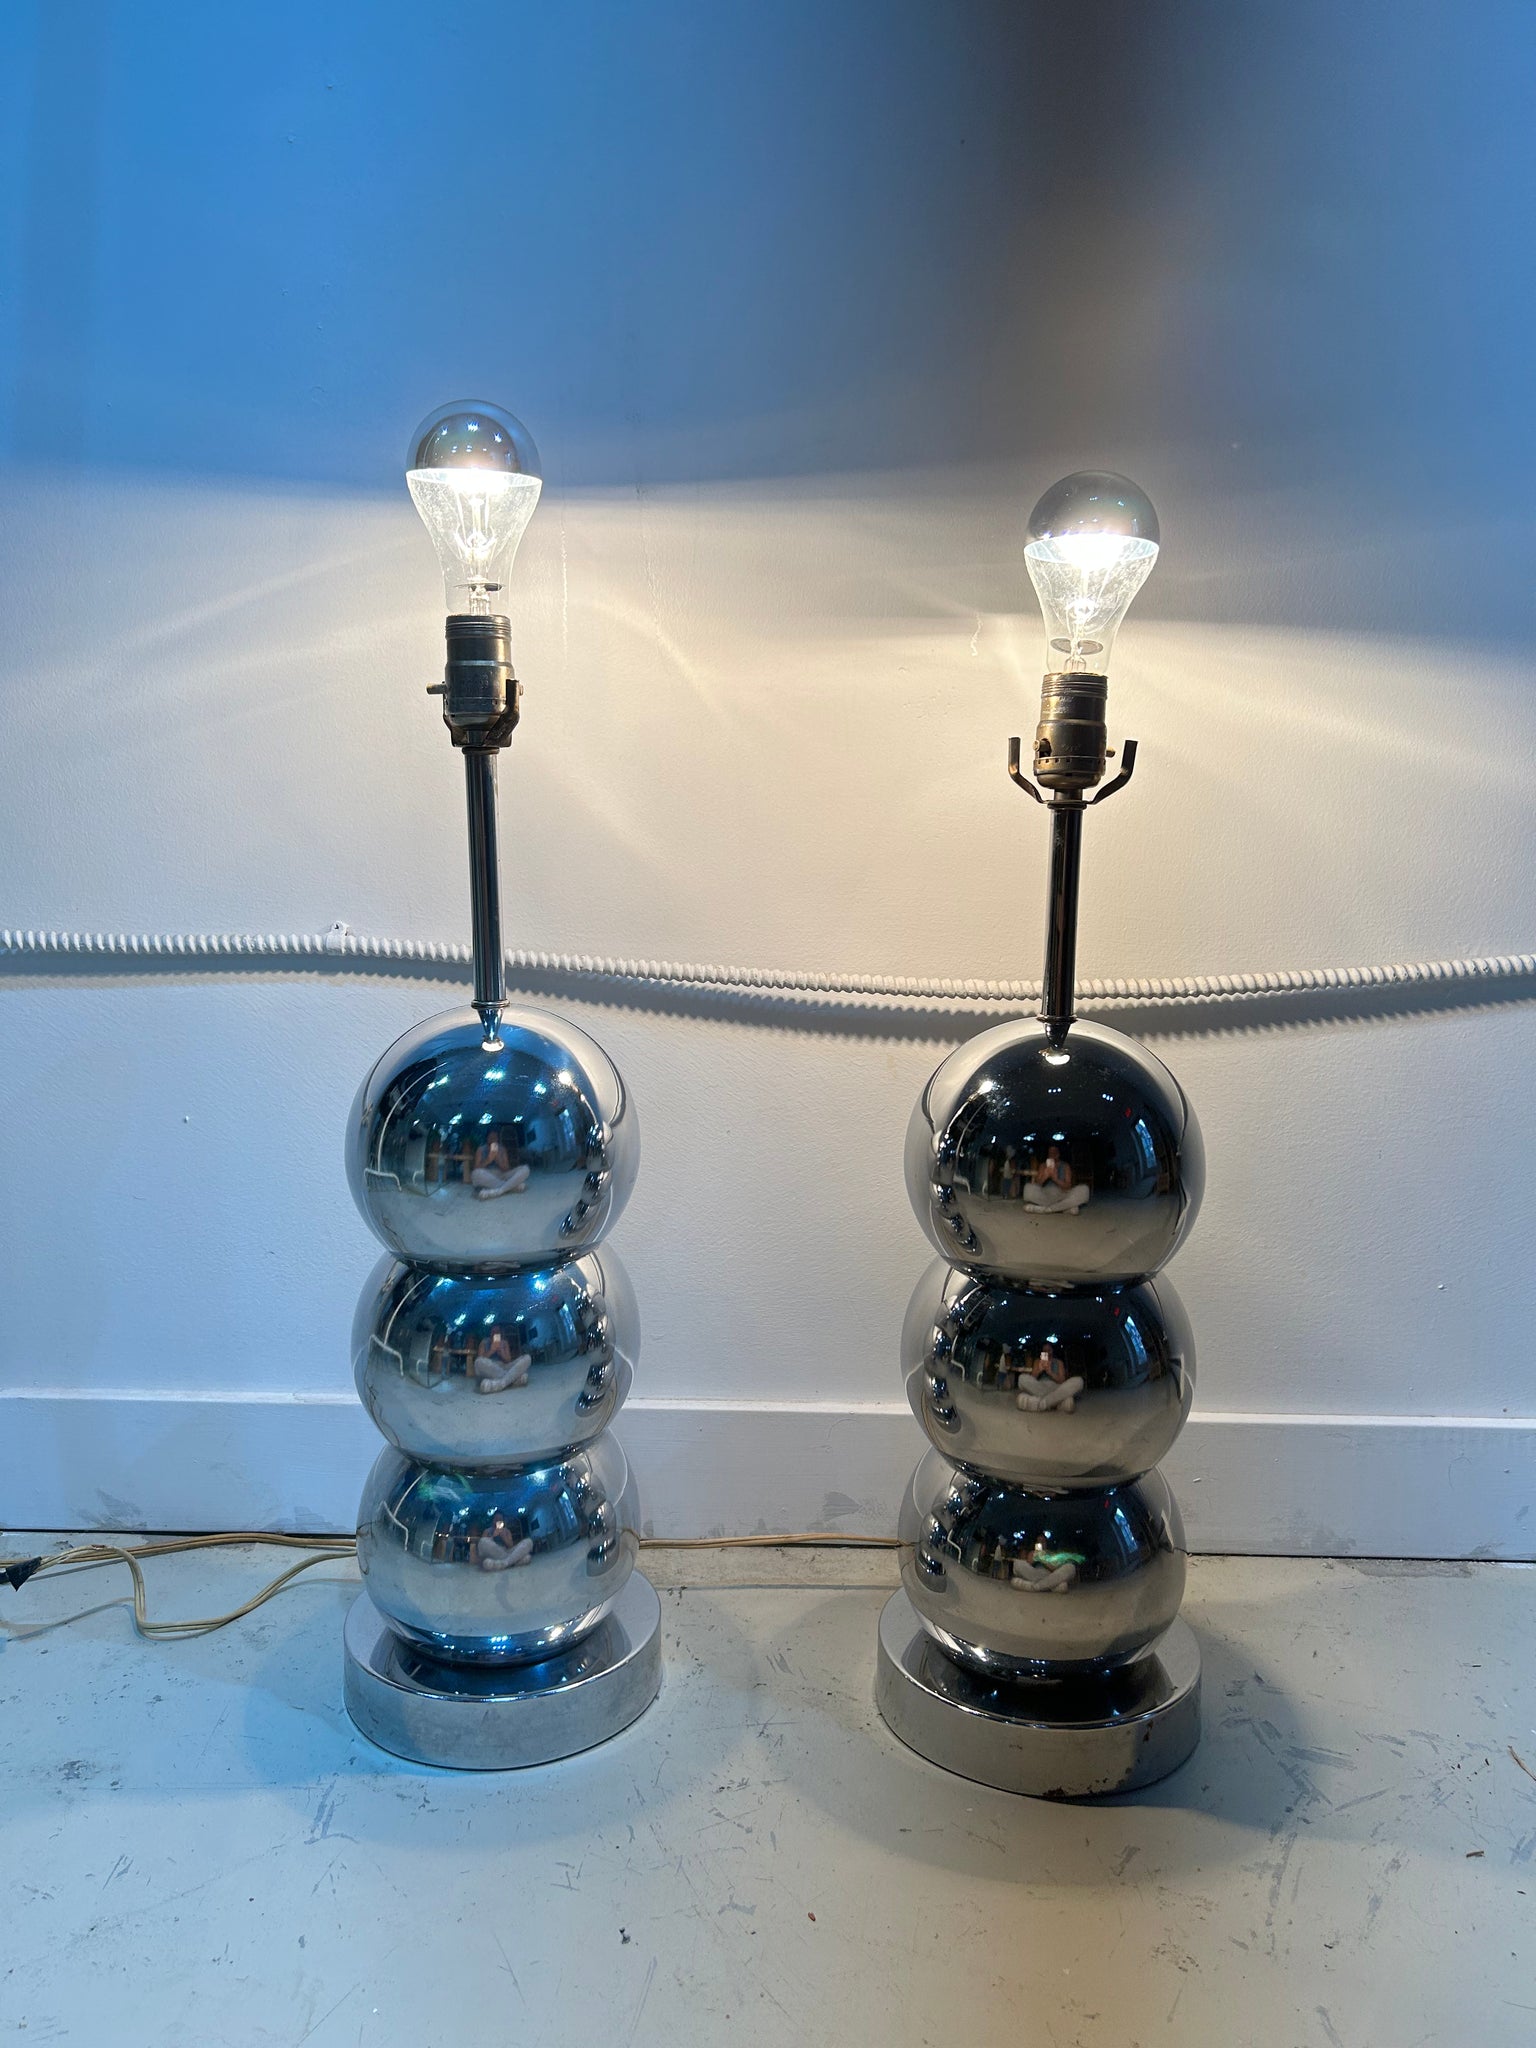 Large chrome Space Age table lamps